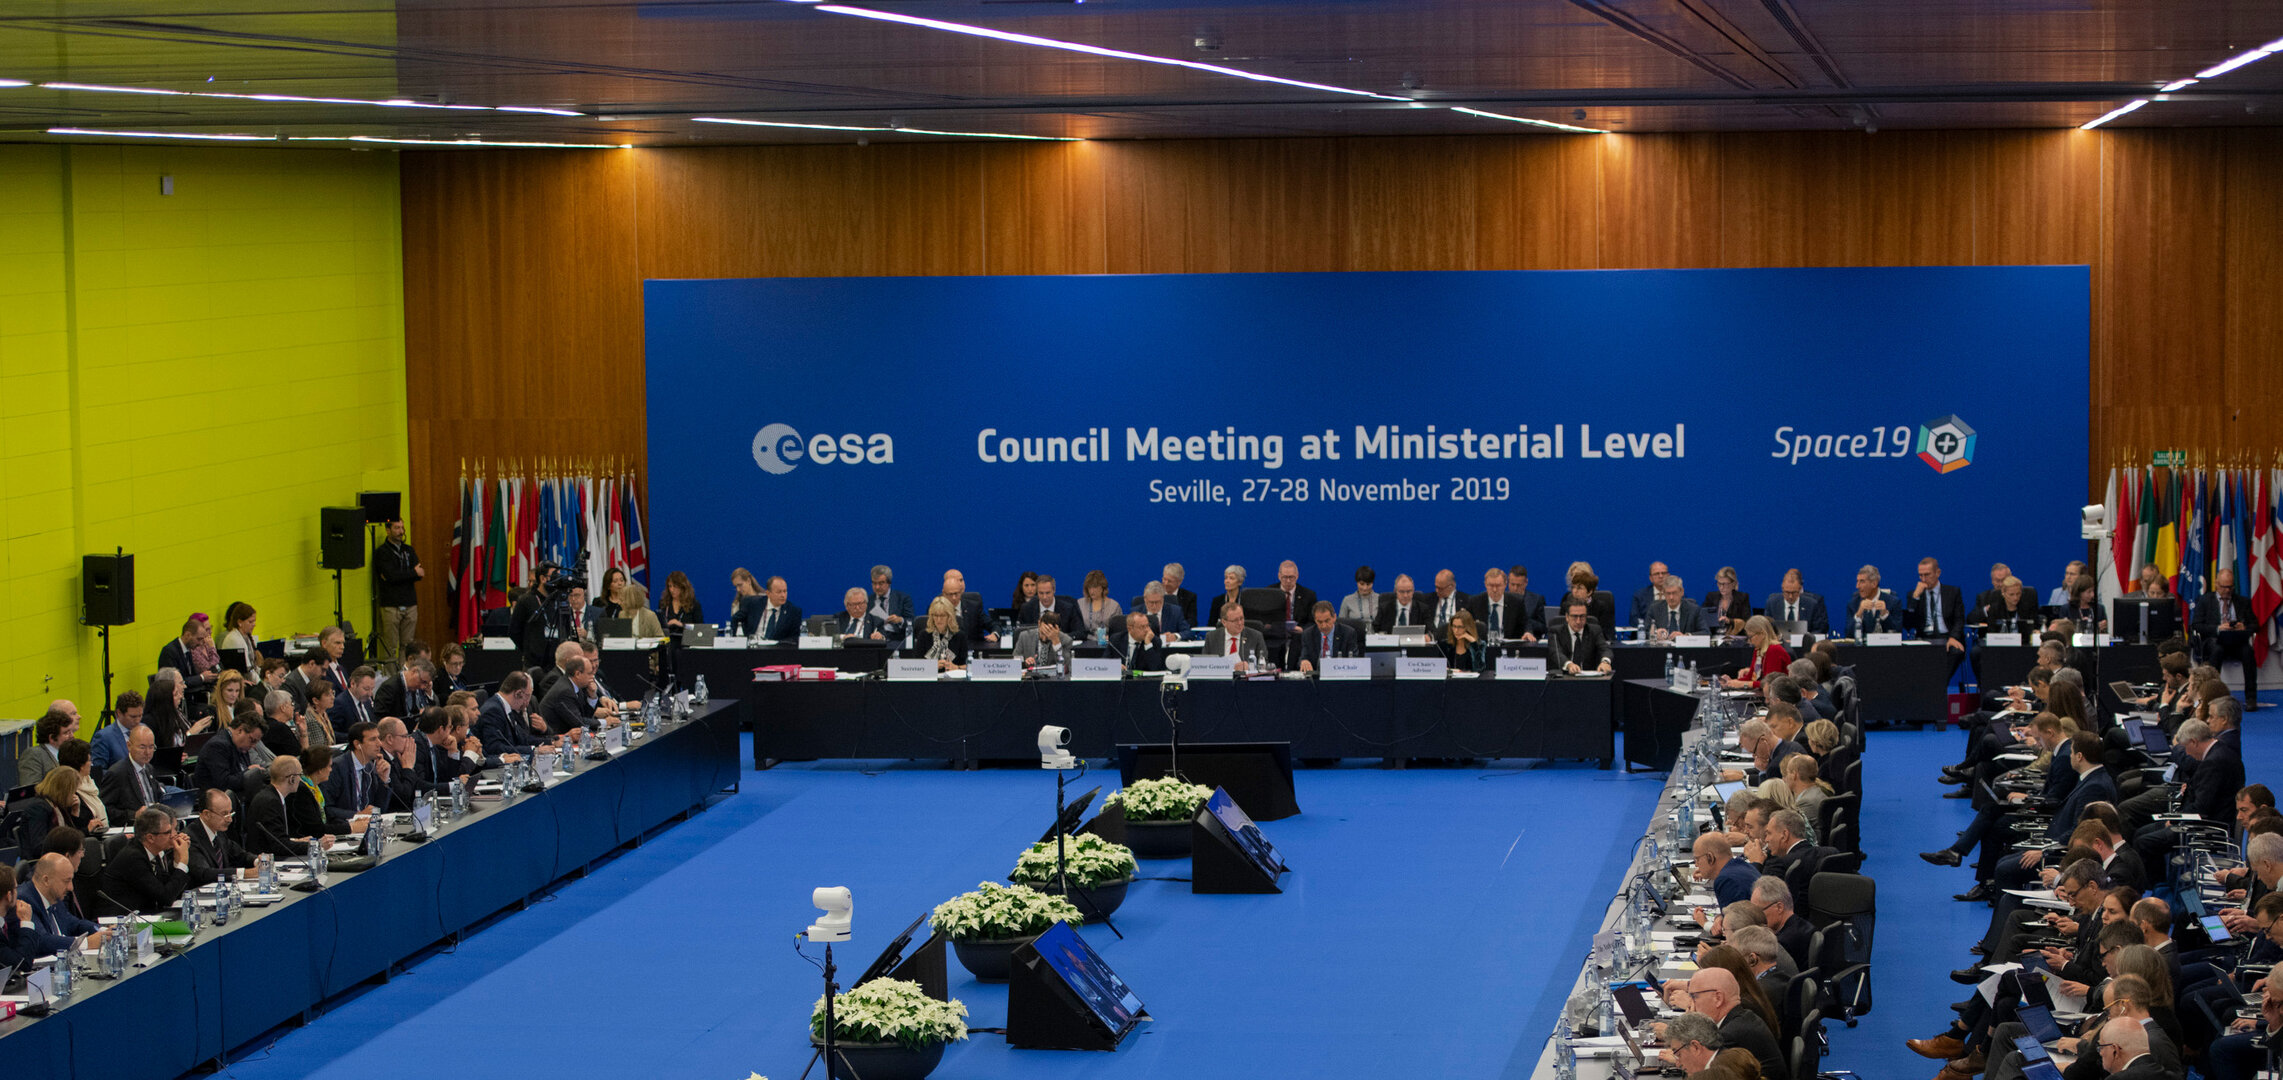 Space19+, the ESA Council at Ministerial level, in Seville, Spain